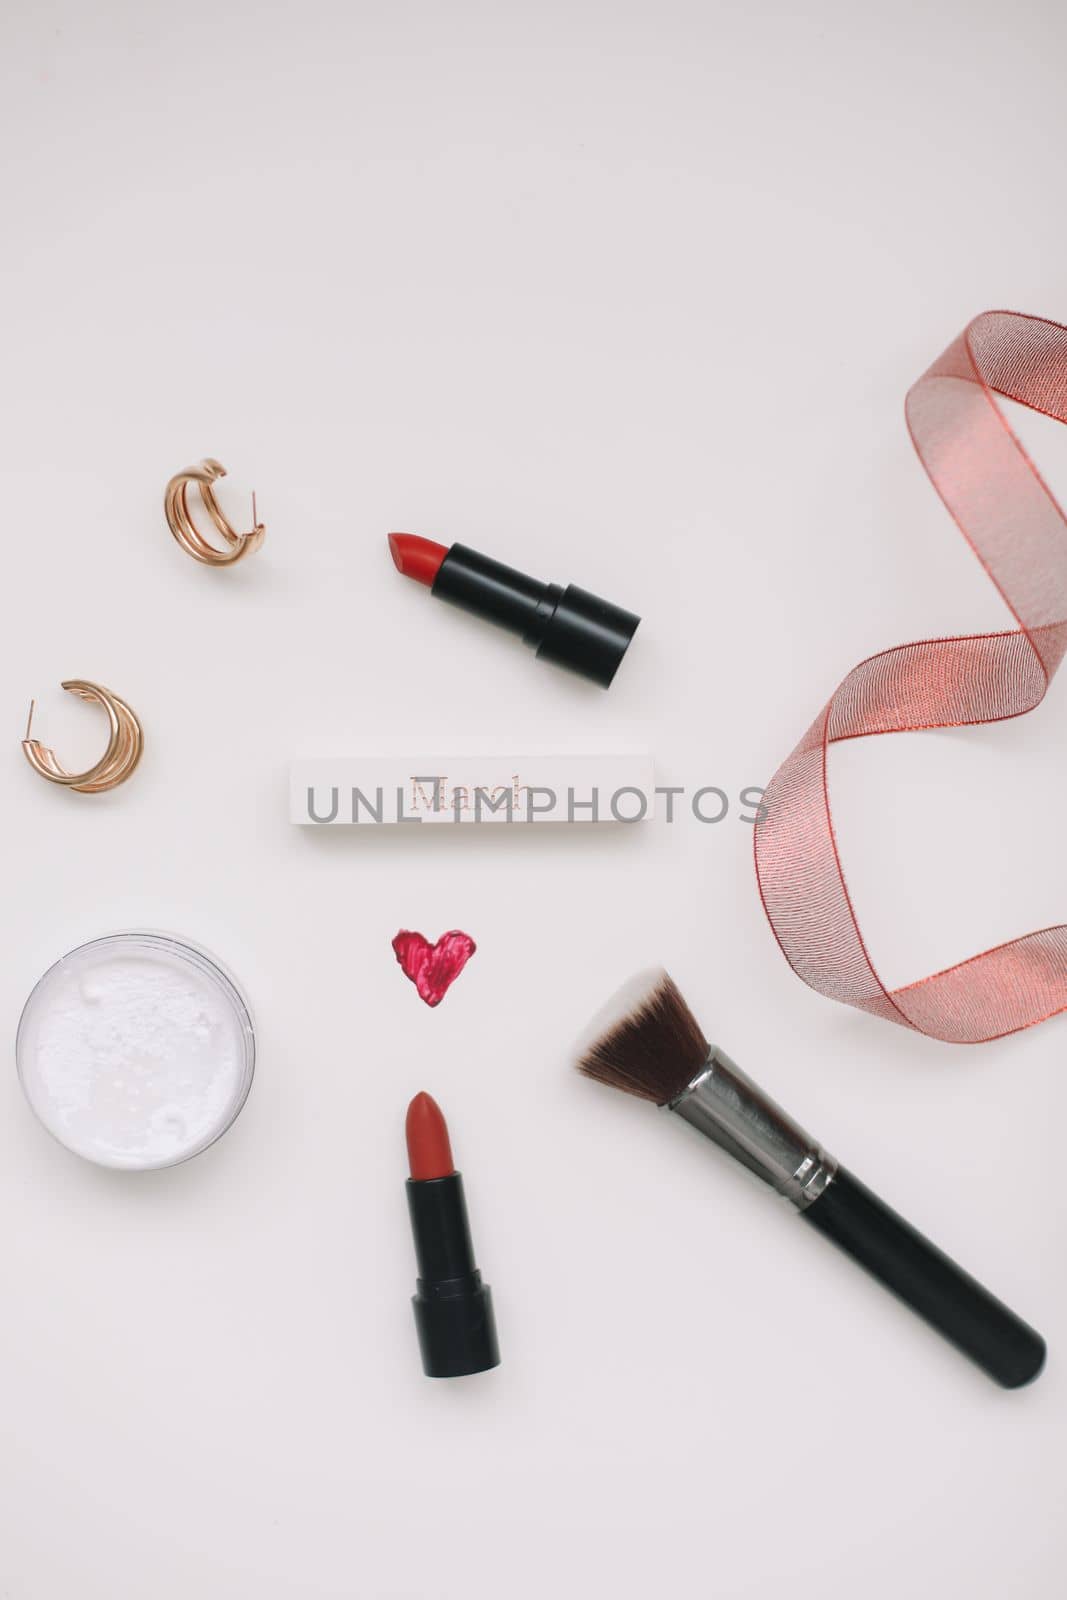 Concept Women's Day, Valentines Day, March 8. Lipsticks, cosmetic makeup products and accessories flatlay top view. by paralisart